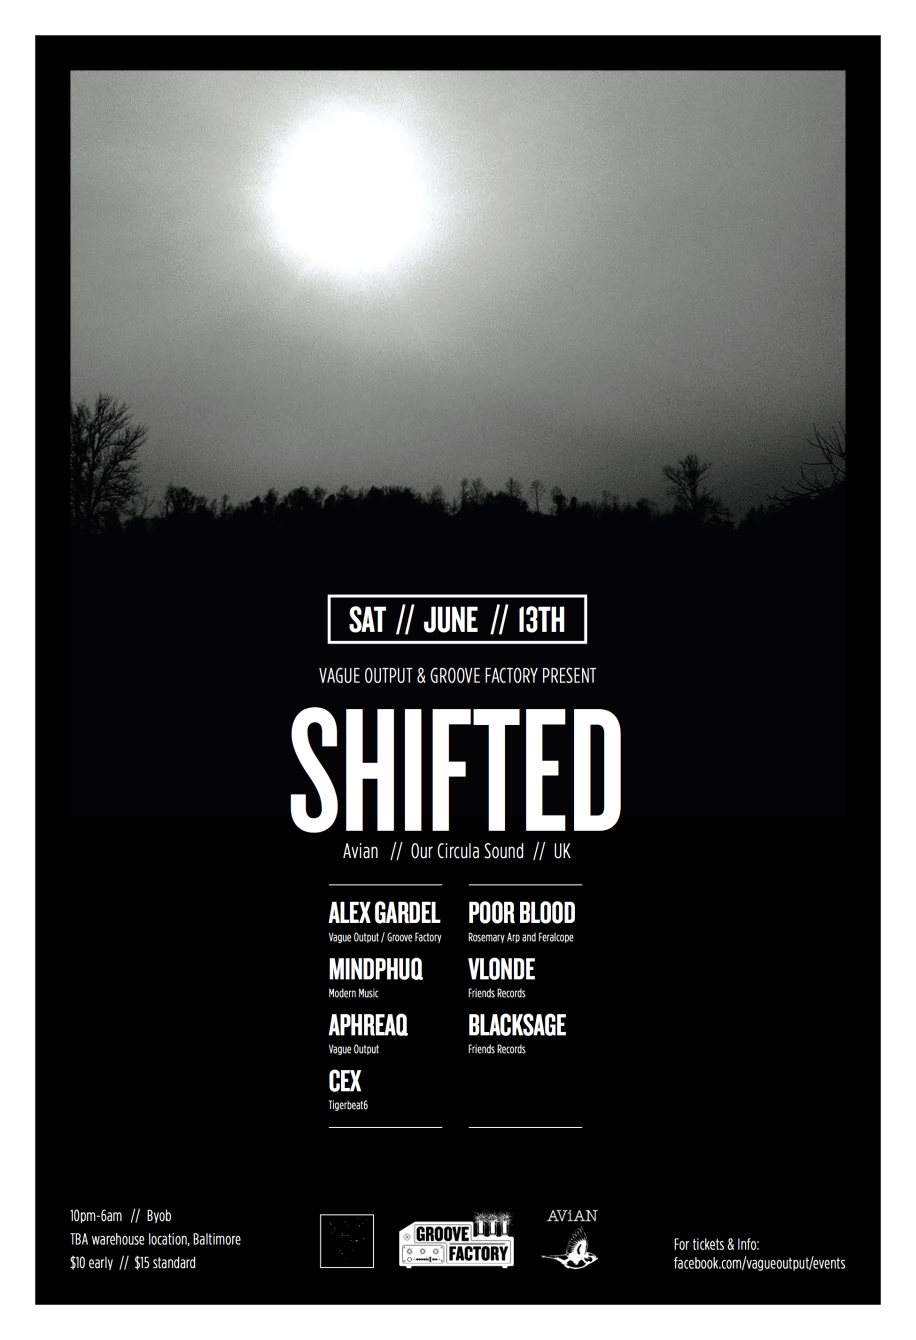 Vague Output & Groove Factory present Shifted - Página frontal